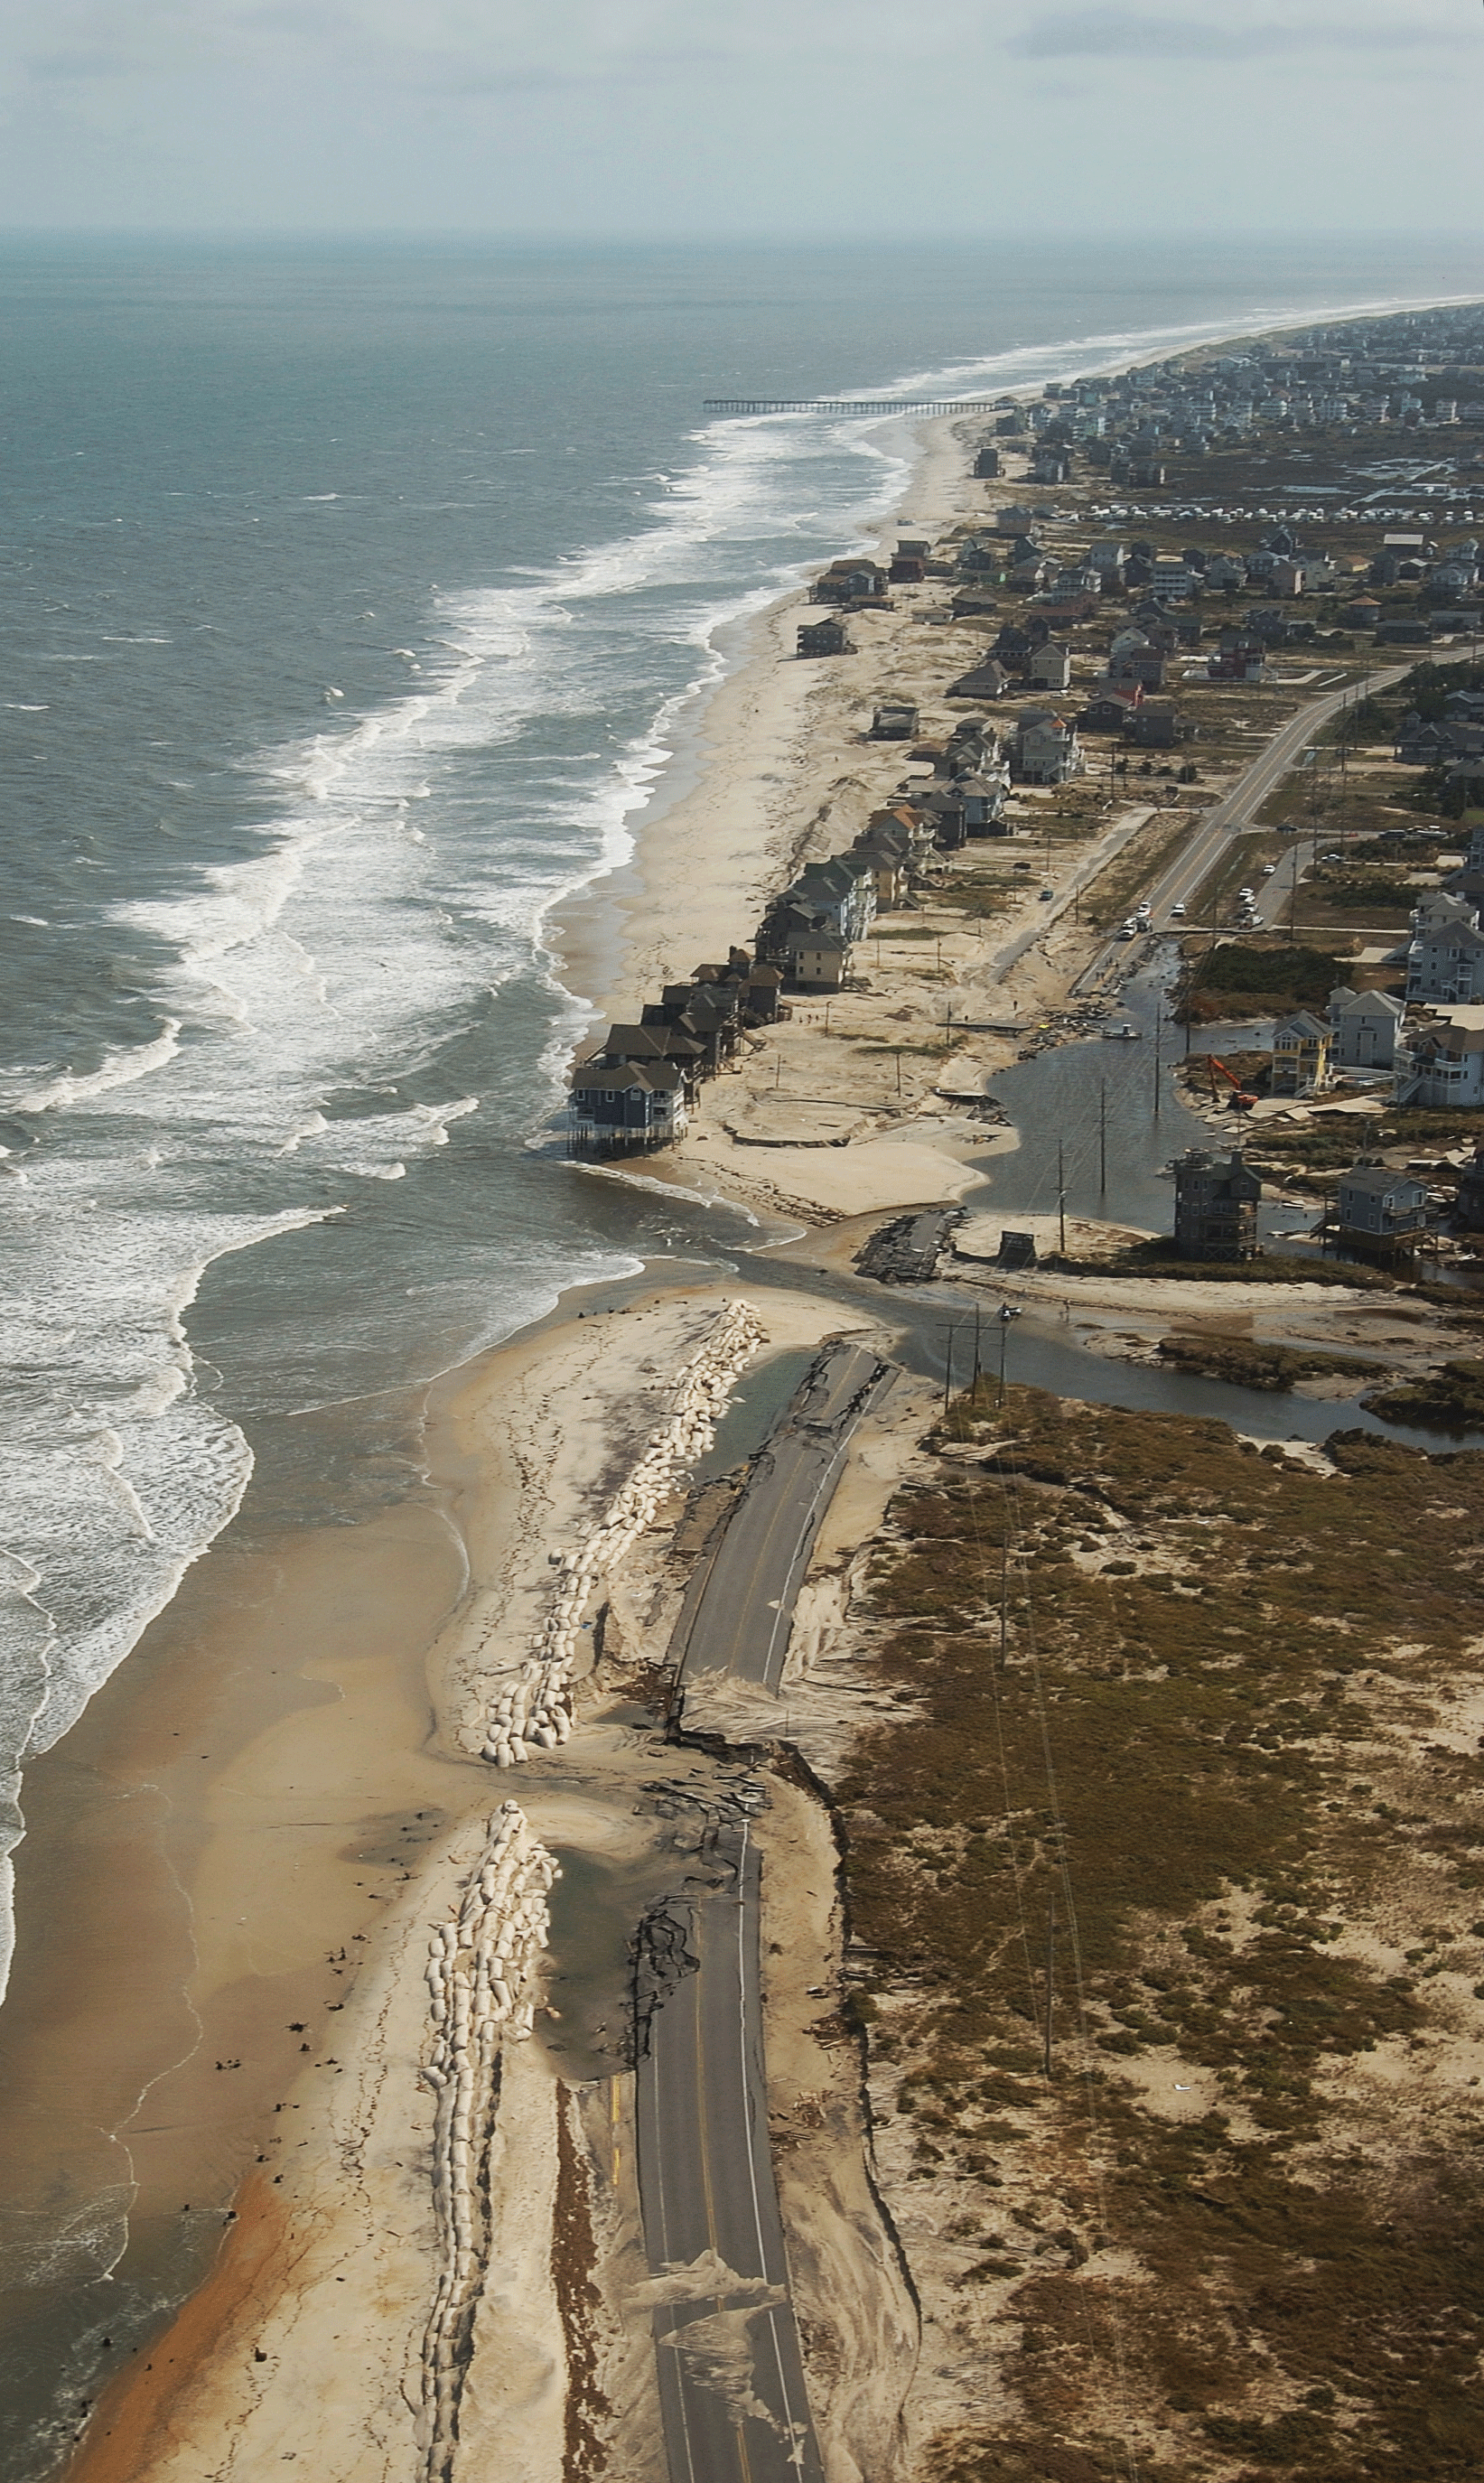 A section of highway contains damaged and washed away sections near the coastline.